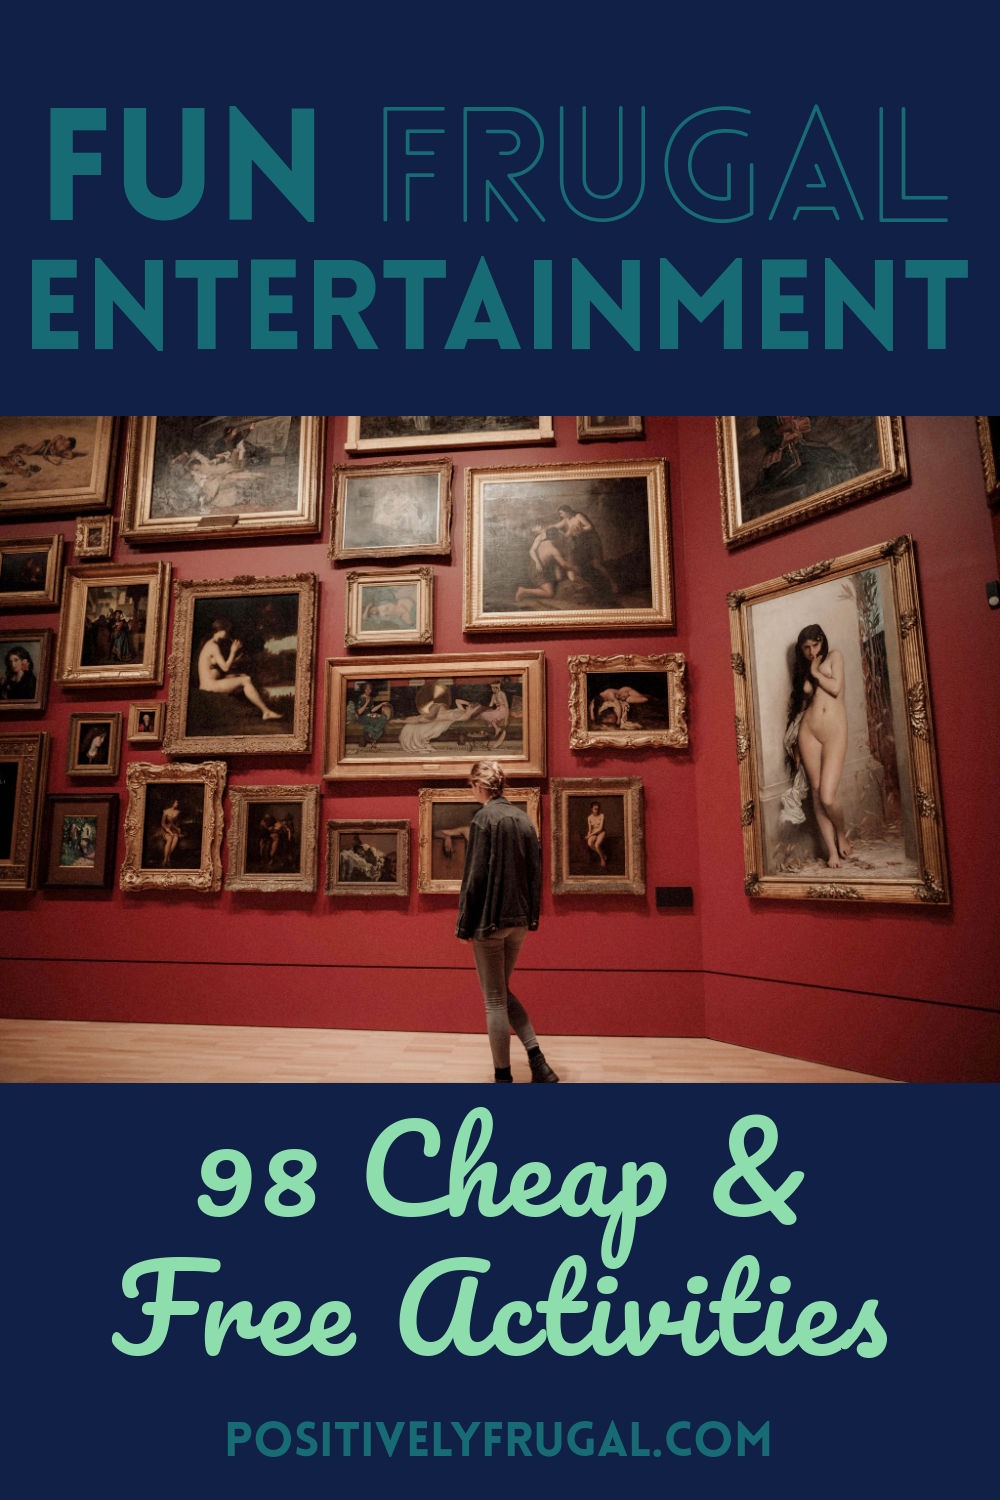 Frugal Entertainment Cheap and Free Activities by PositivelyFrugal.com